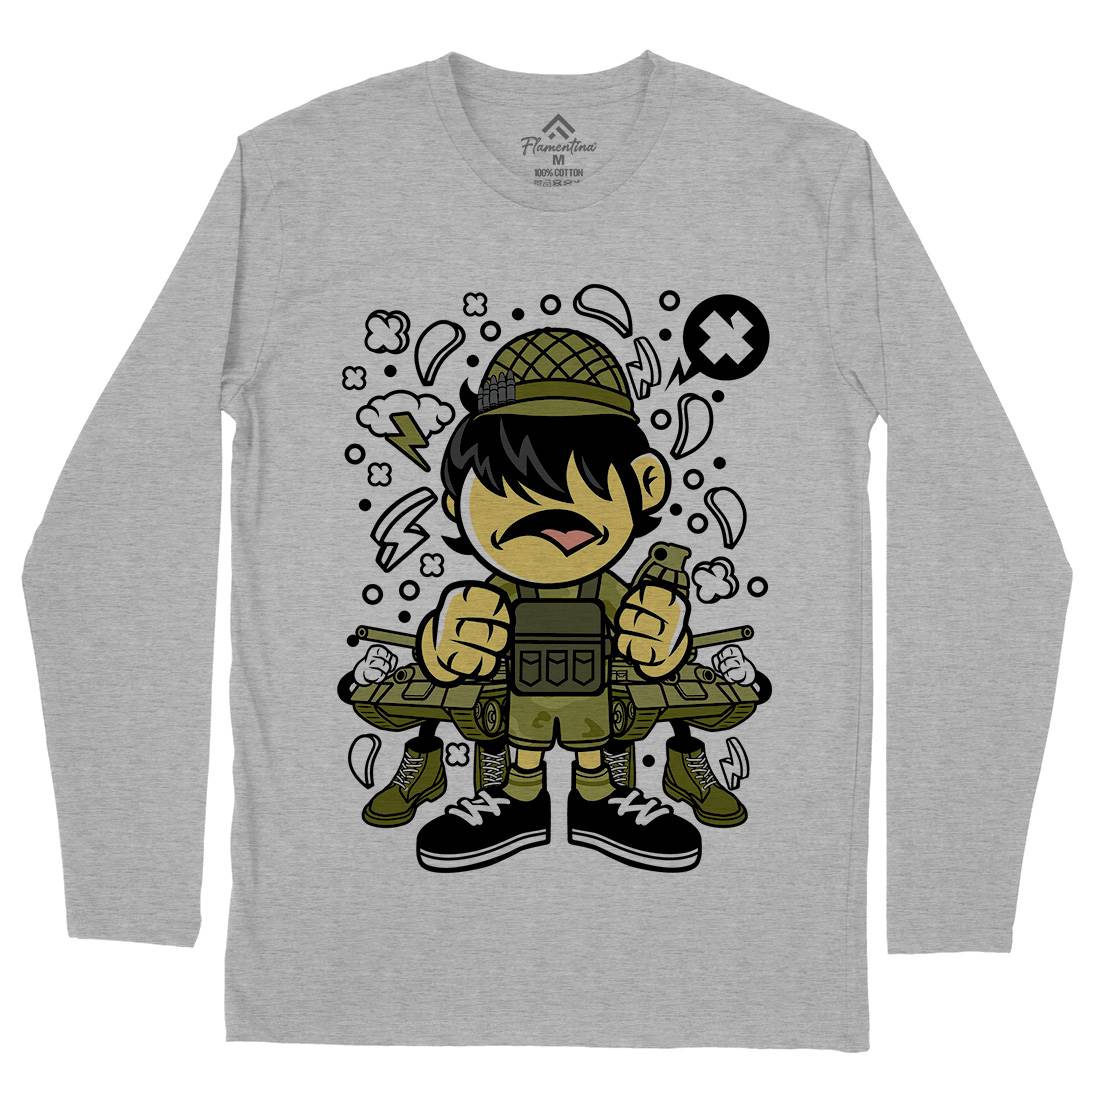 Soldier Kid Mens Long Sleeve T-Shirt Army C253